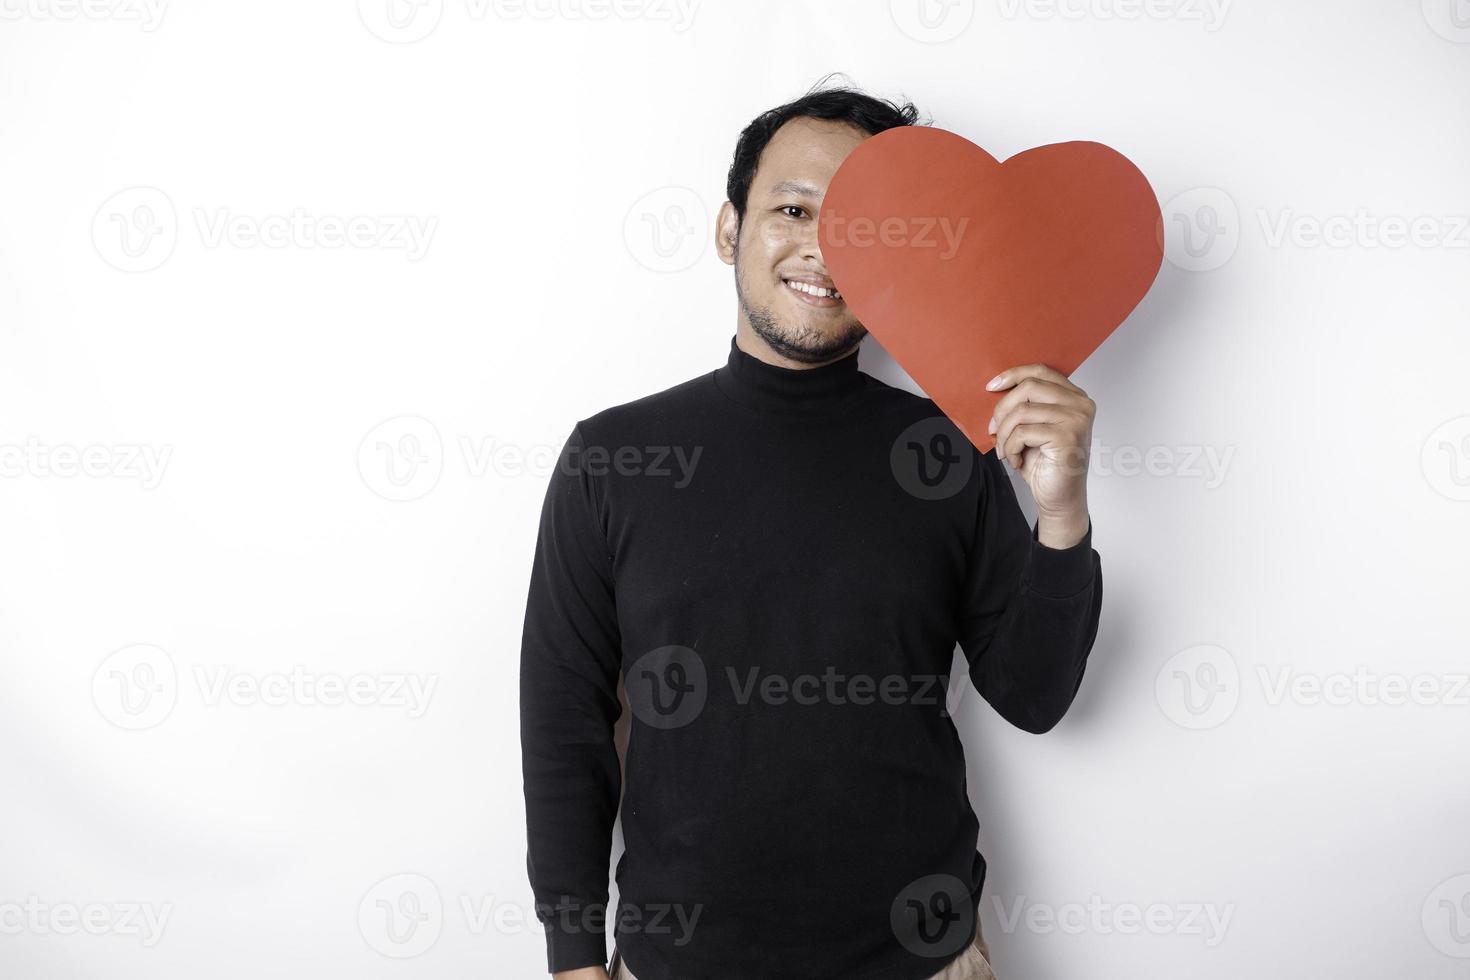 A portrait of a happy Asian man wearing a black shirt, holding a red heart-shaped paper isolated by white background photo